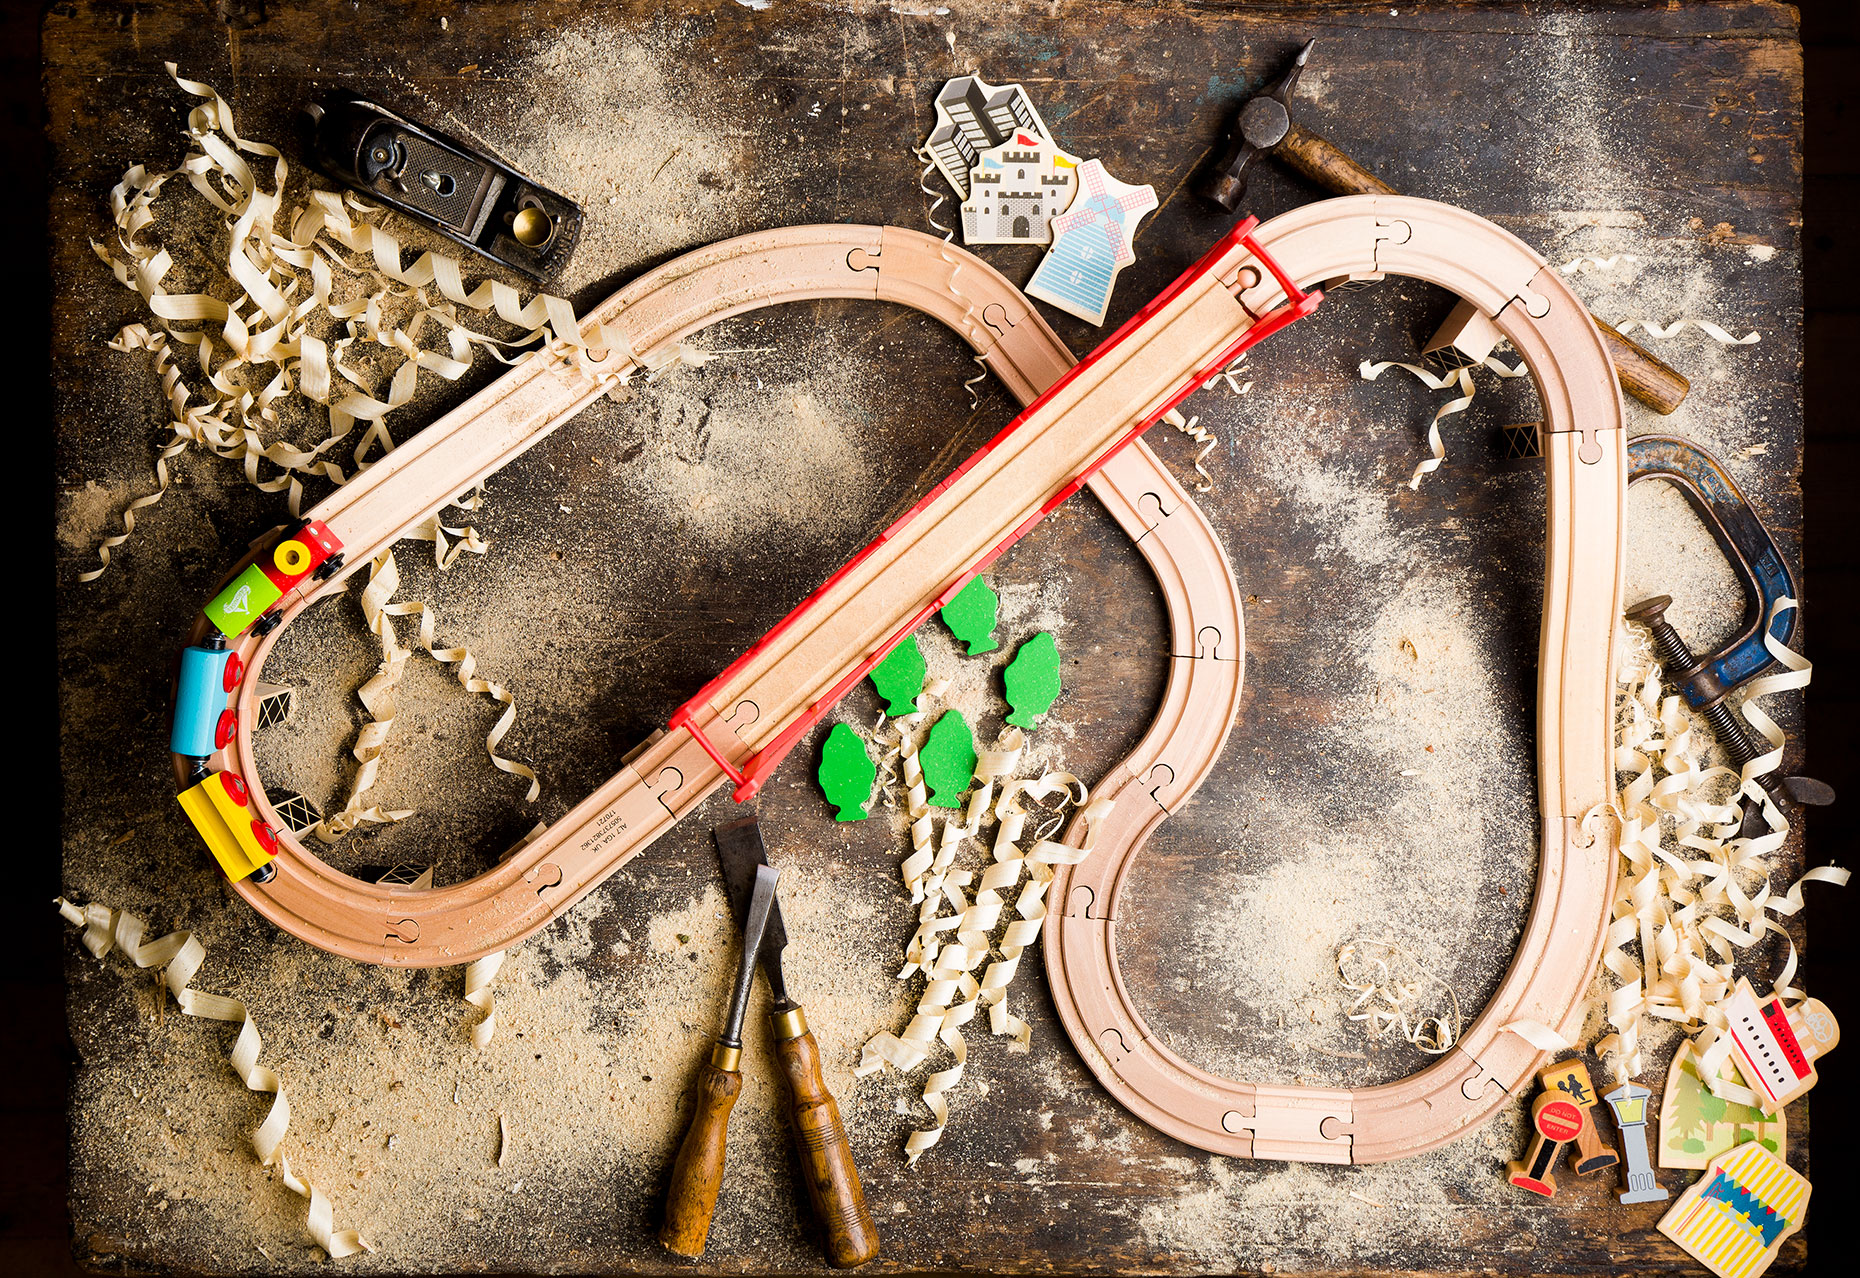 Editorial feature photography of a wooden toy train set in carpenters workshop.